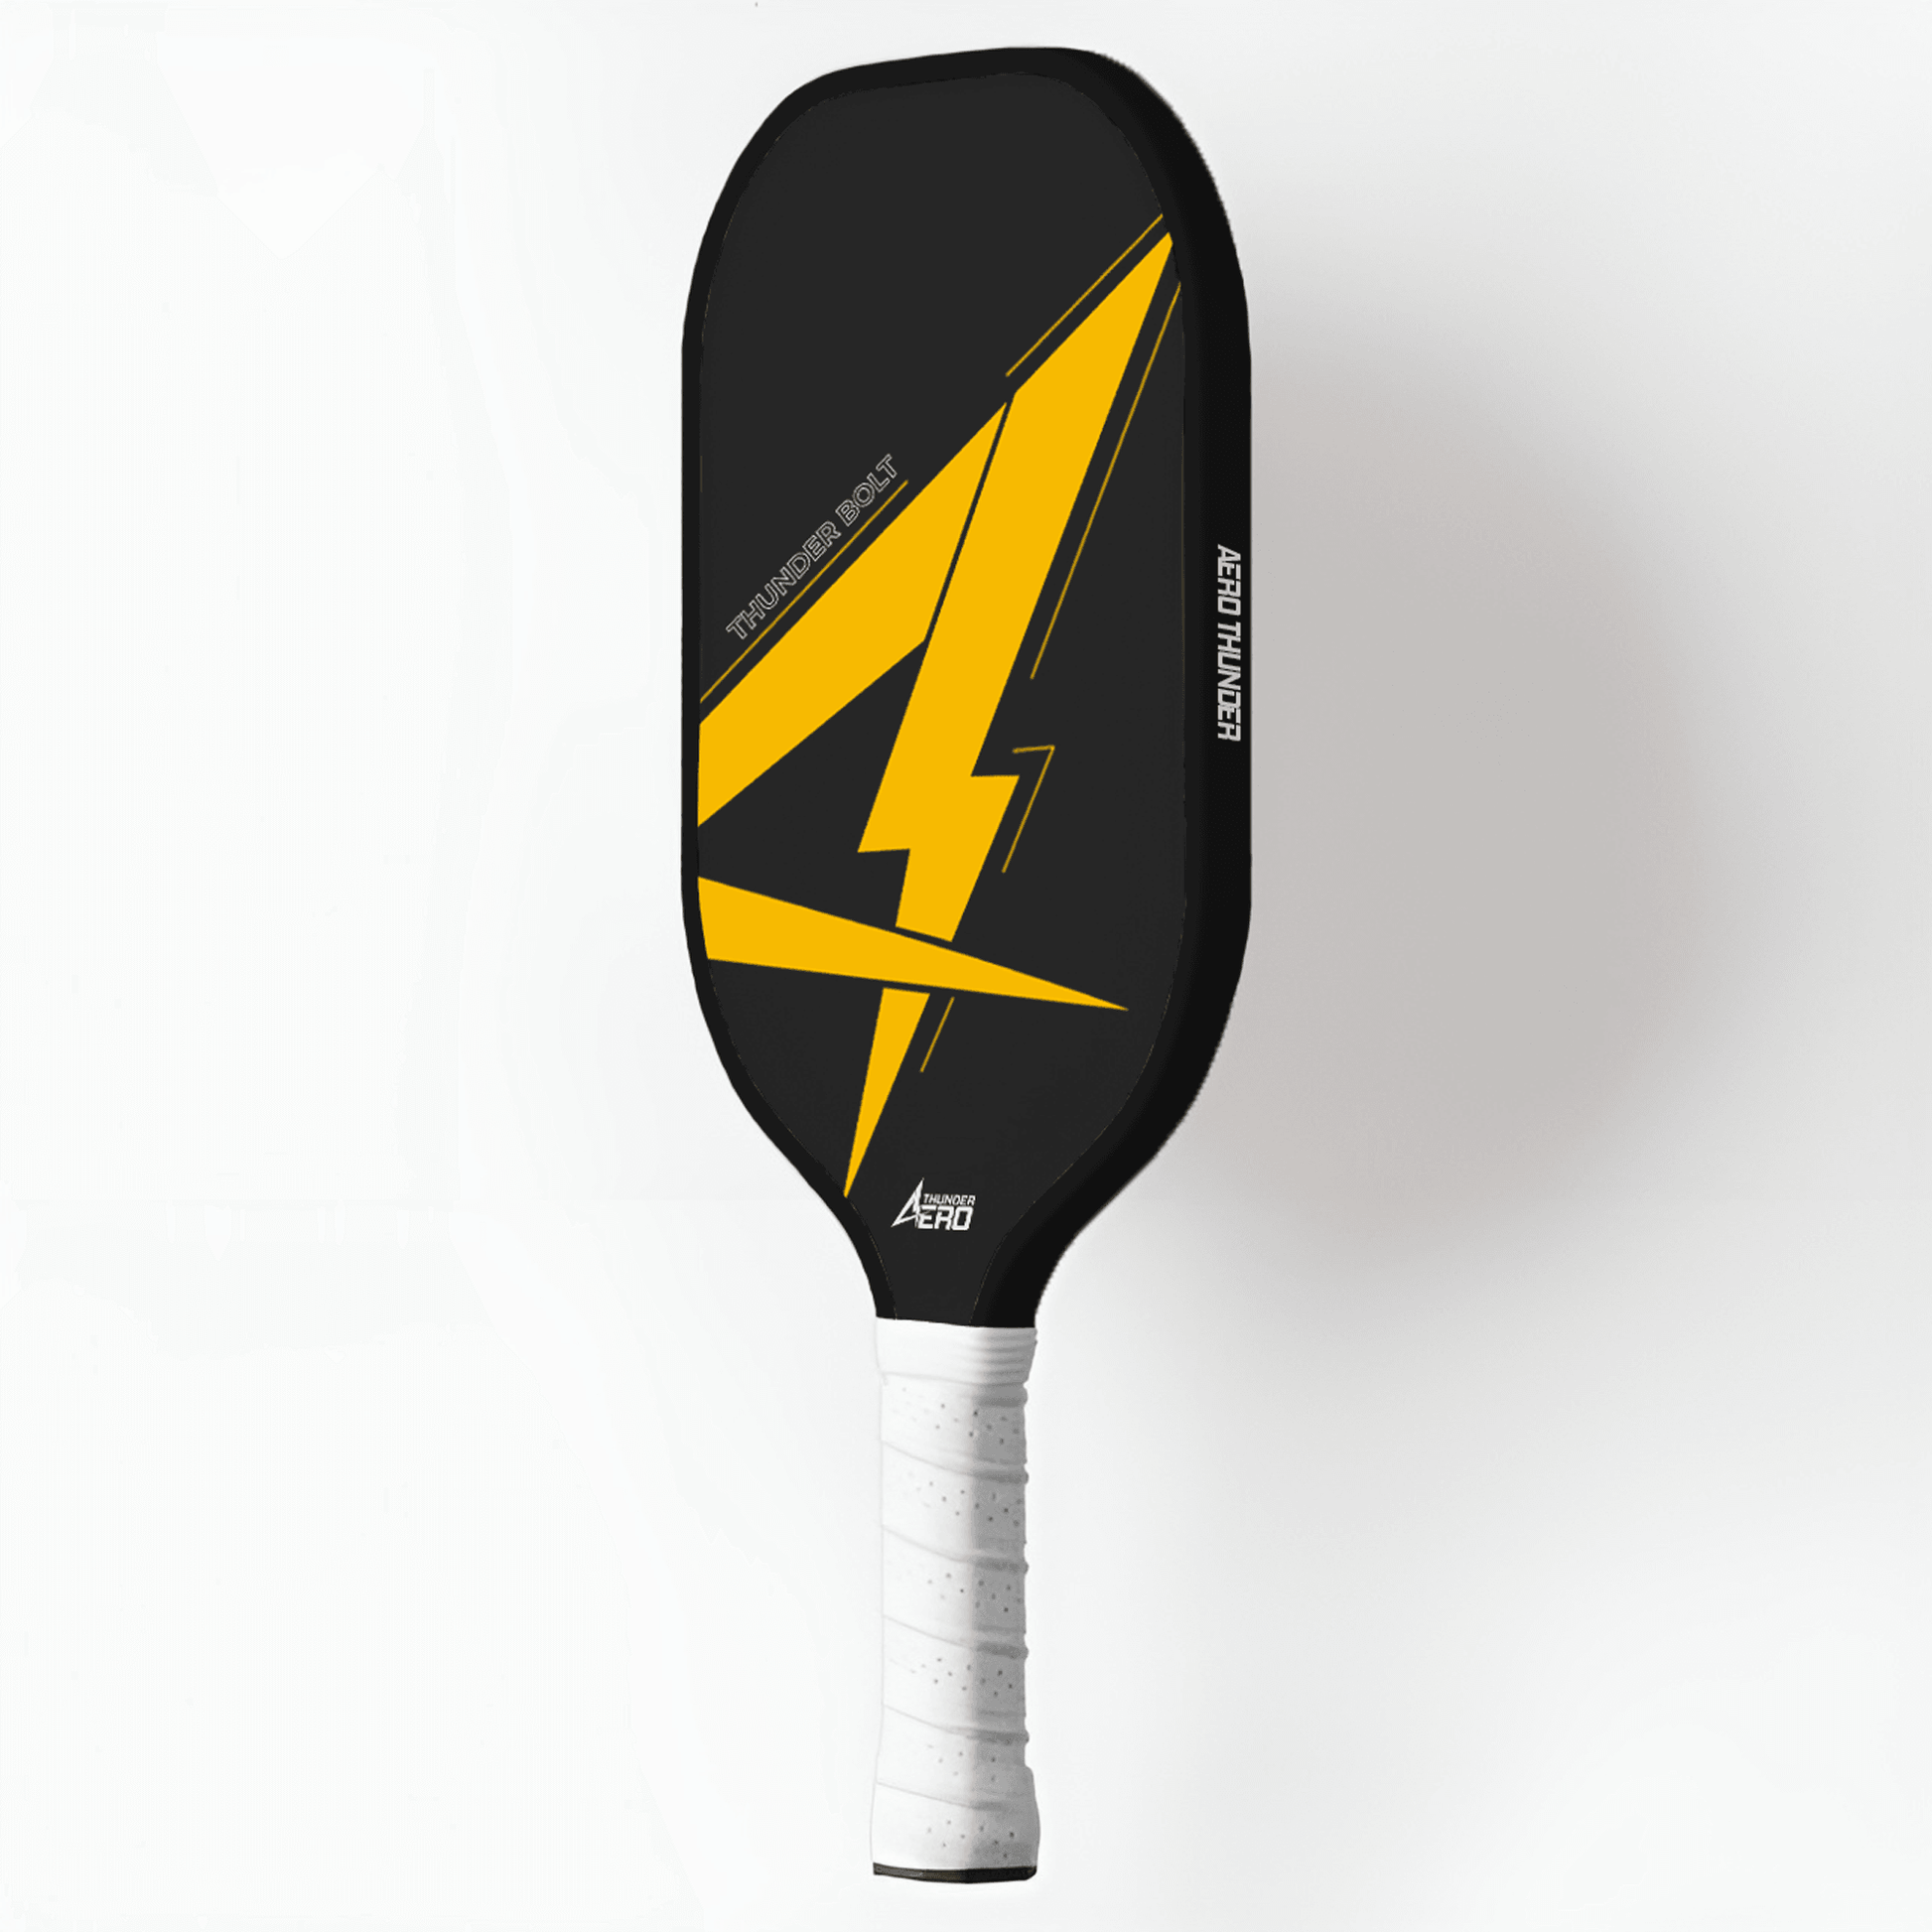 Aero Thunder Pickleball Paddle - Cutting-Edge Design for Spin Accuracy